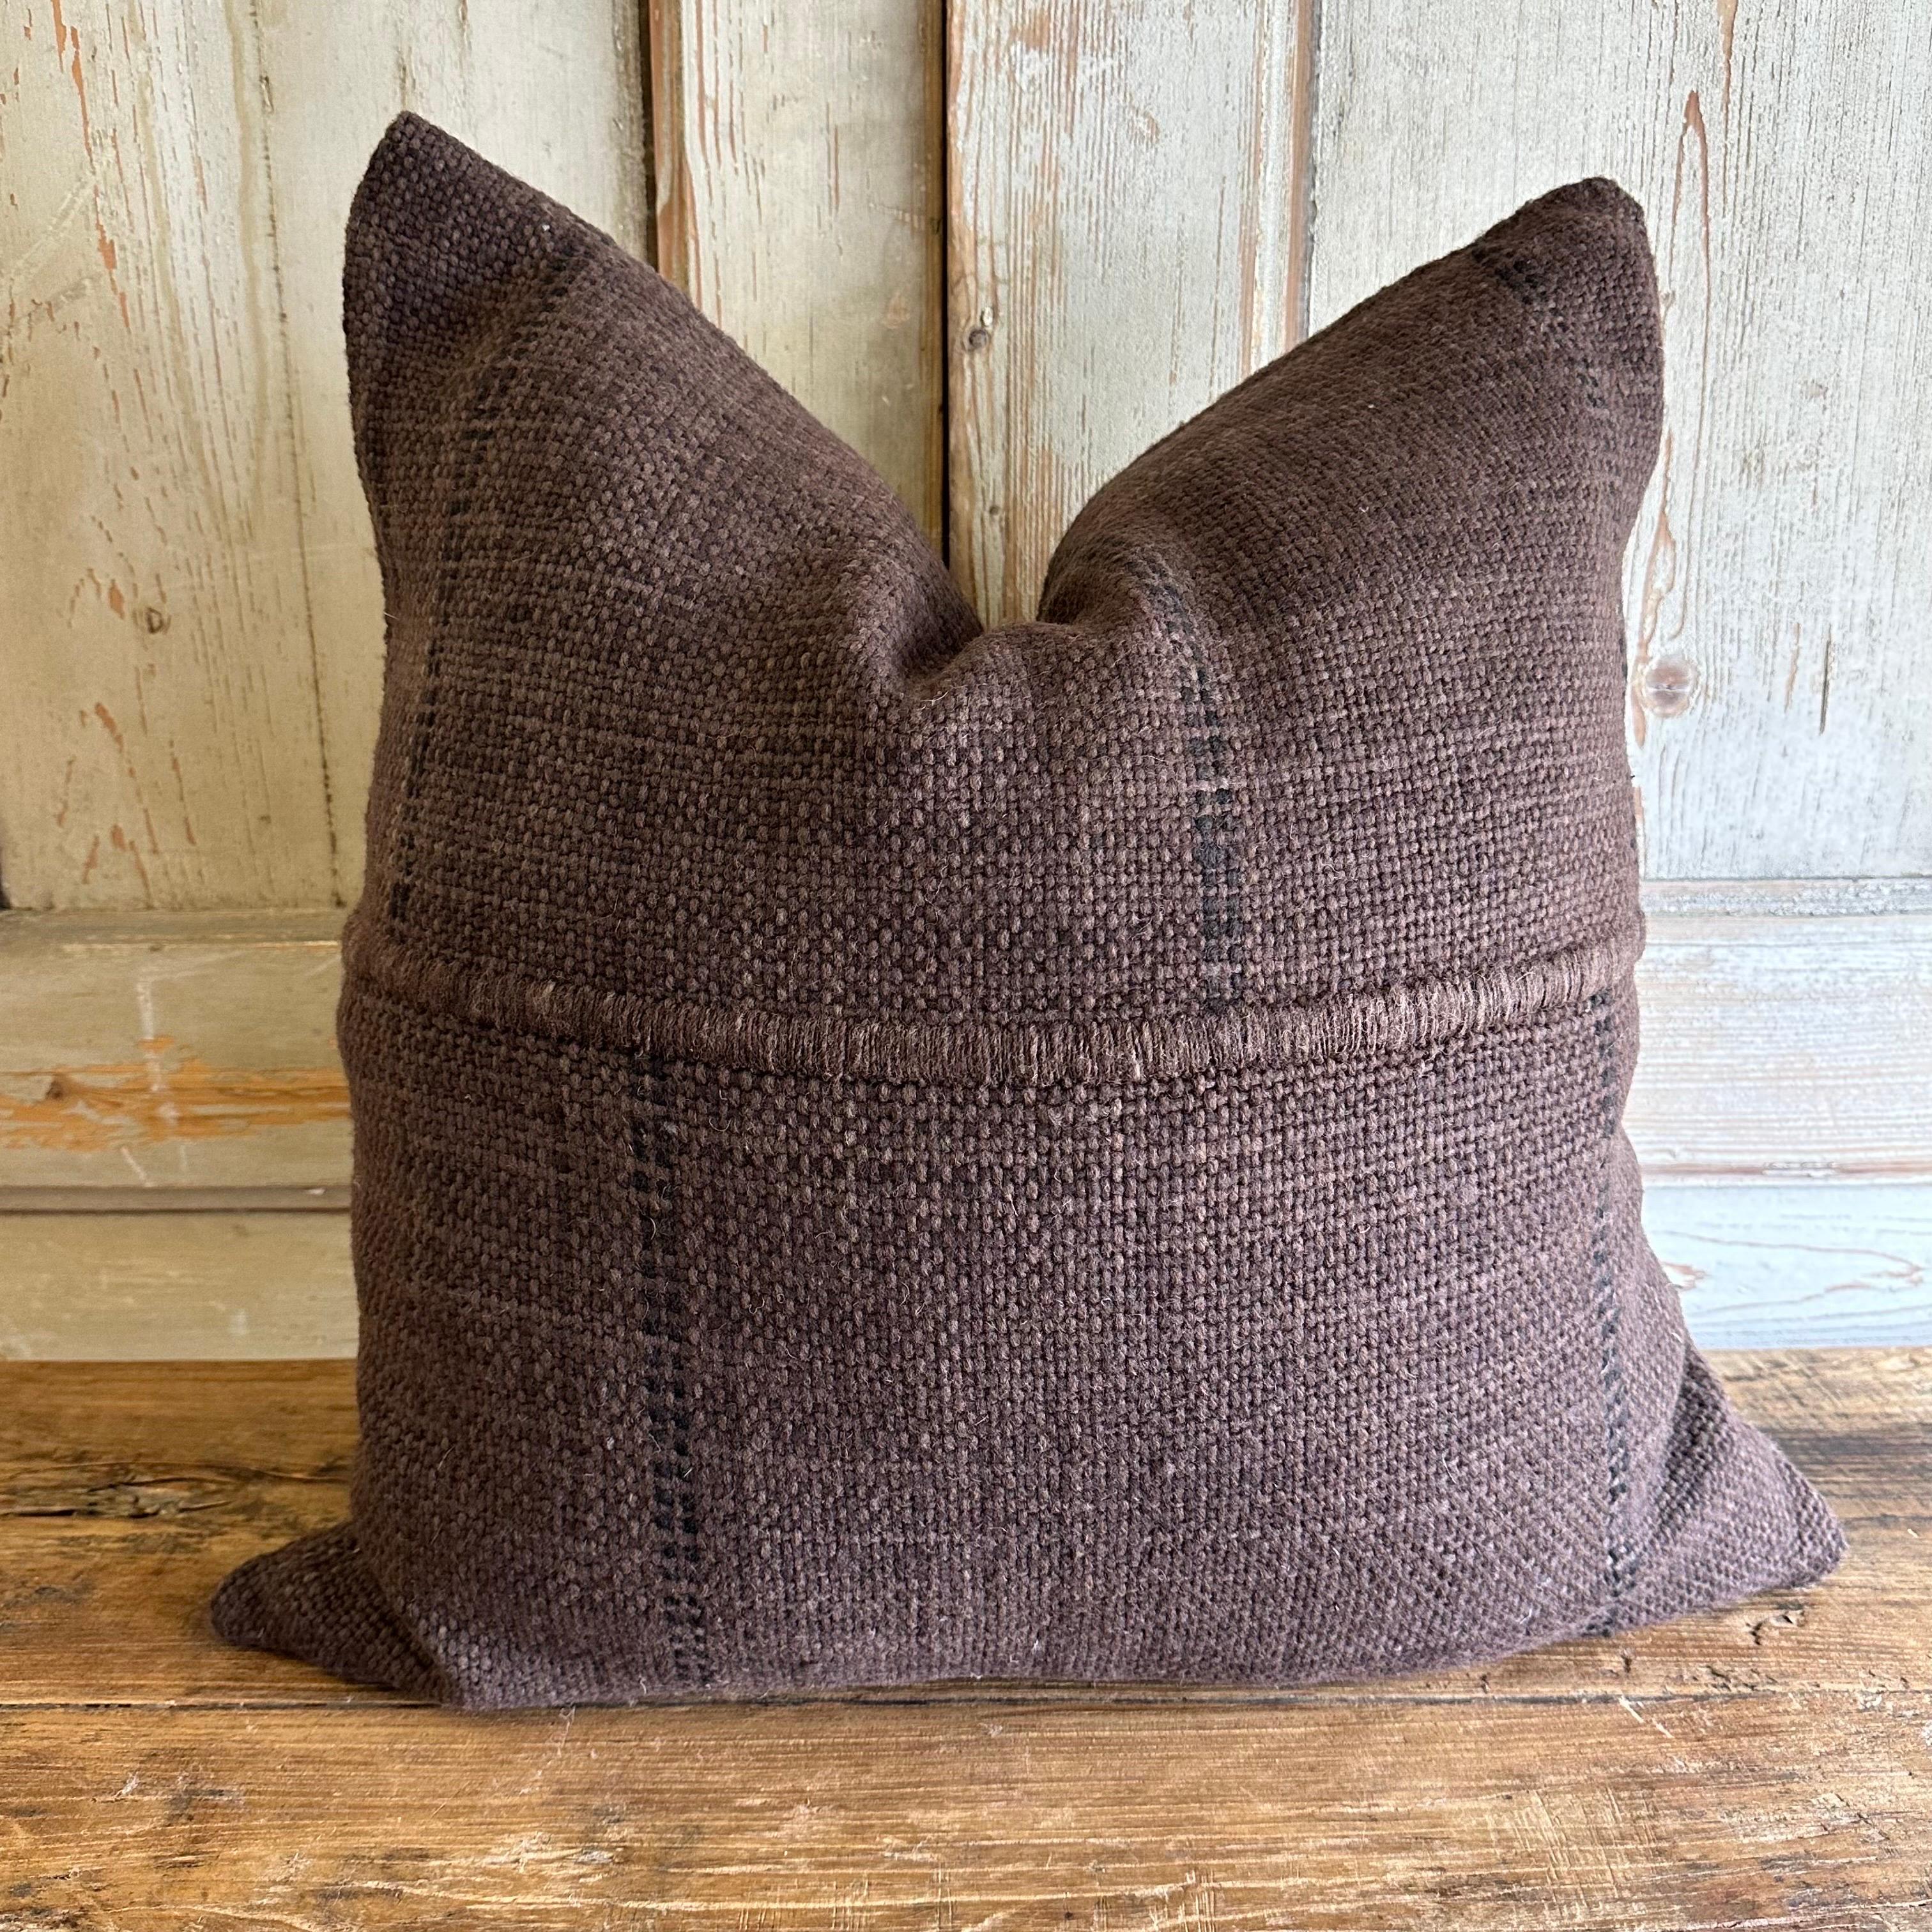 Wool Alpaca accent pillow from. A beautiful rich coco brown and dark brown dot stripe pillow. Large wood yarns woven to create a beautiful texture. Hidden zipper closure. Due to the unique yarns, the color varies which are normal and to be expected.